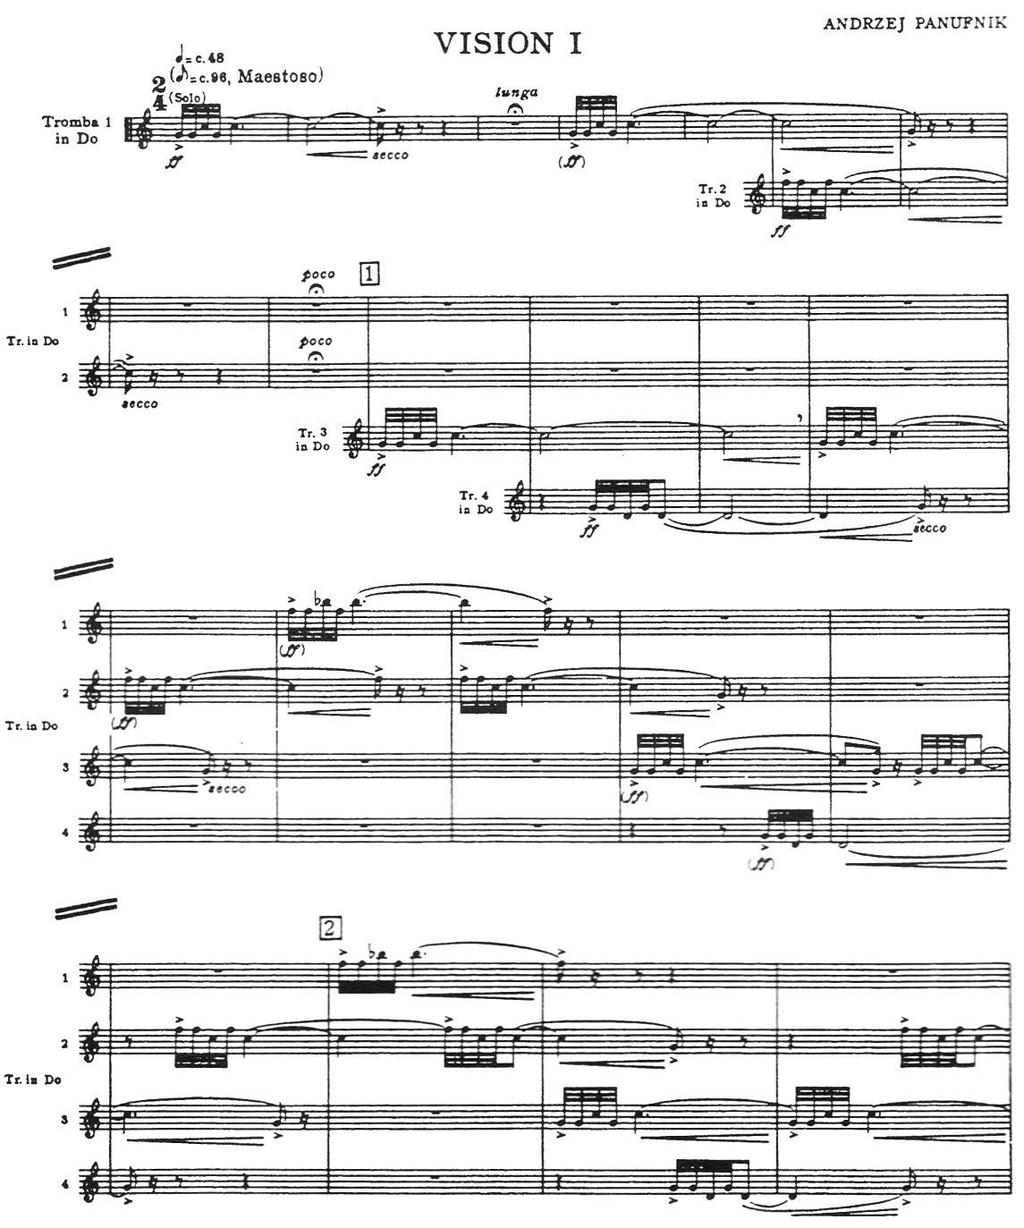 Figure 29: Sinfonia Sacra, Vision I (Perfect Fourth) The first 23 bars of Vision I played by four trumpets in C.